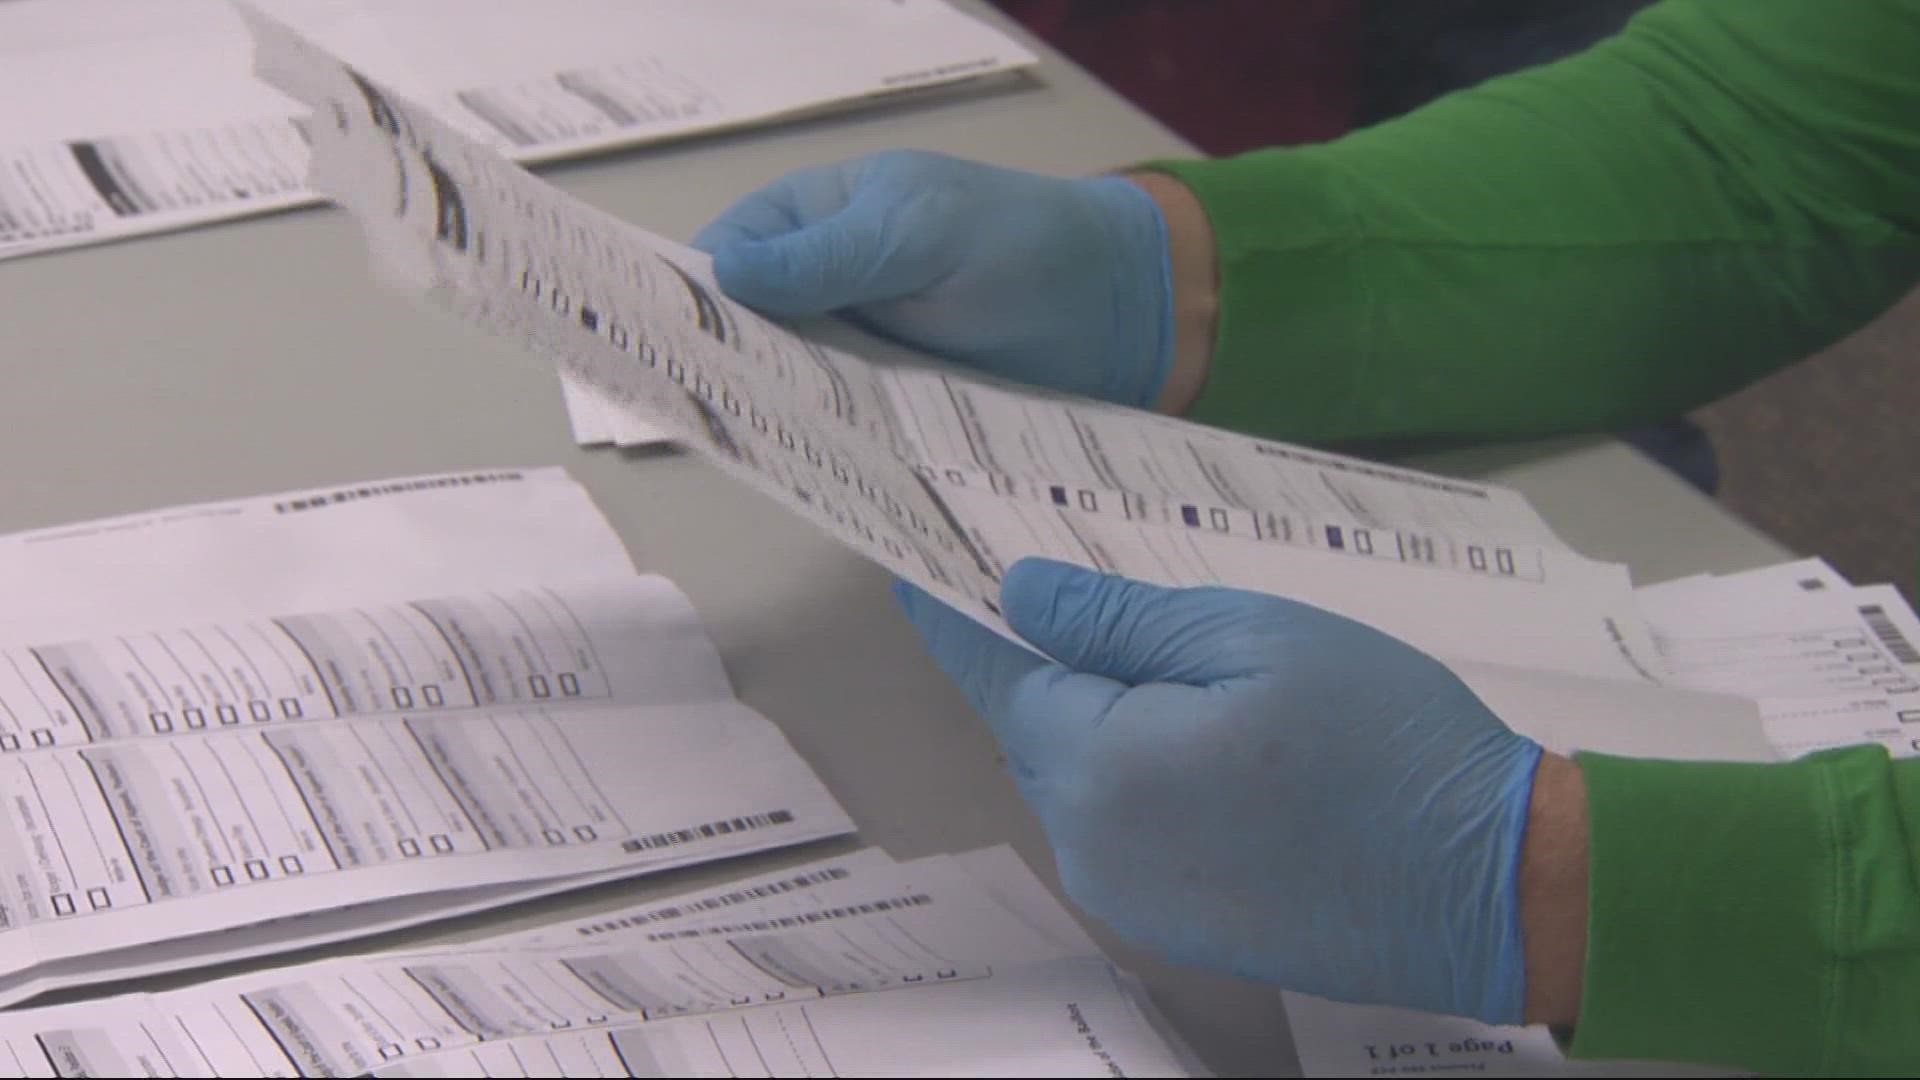 Thousands of ballots sent to Clackamas County voters were printed with an unreadable barcode. Now, hundreds of employees are working to process them by hand.